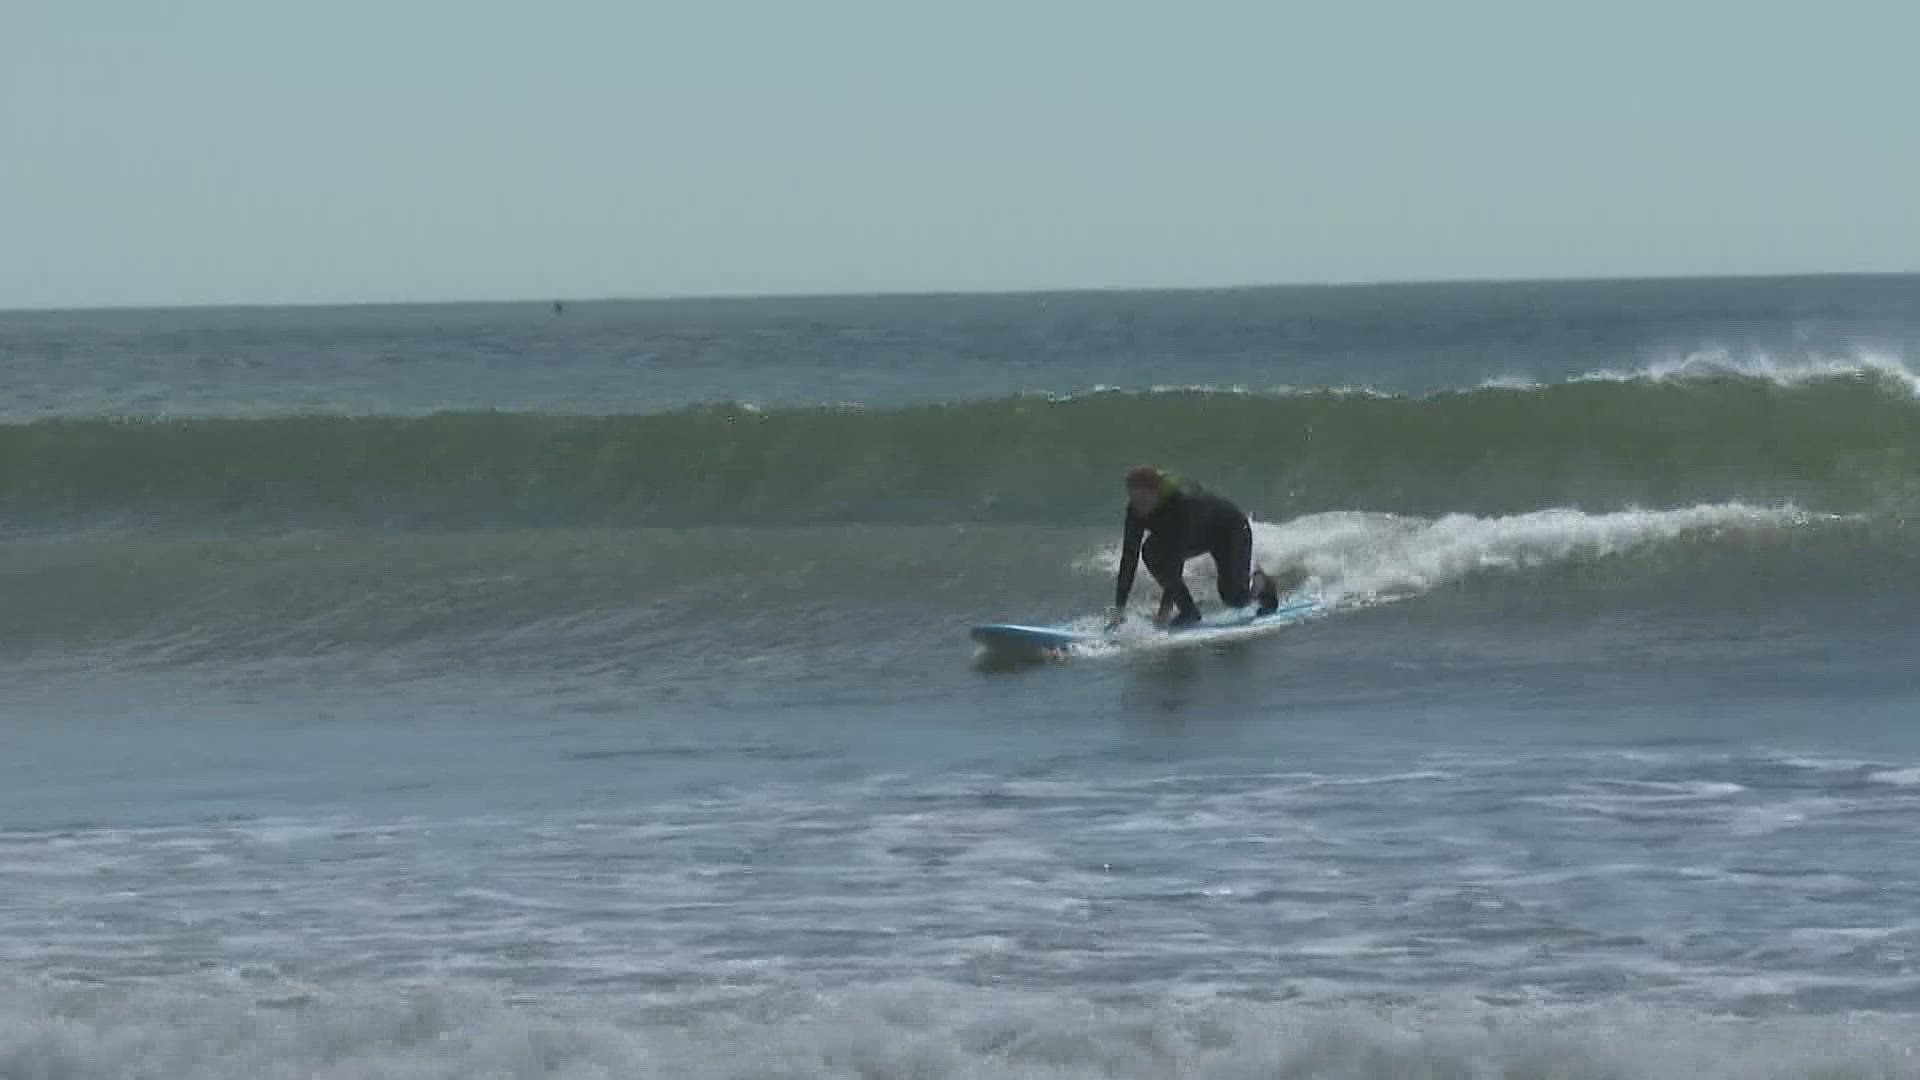 Ryan McDermott, co-owner of Black Point Surf Shop, teaches how the basics of surfing can bring nothing but joy.